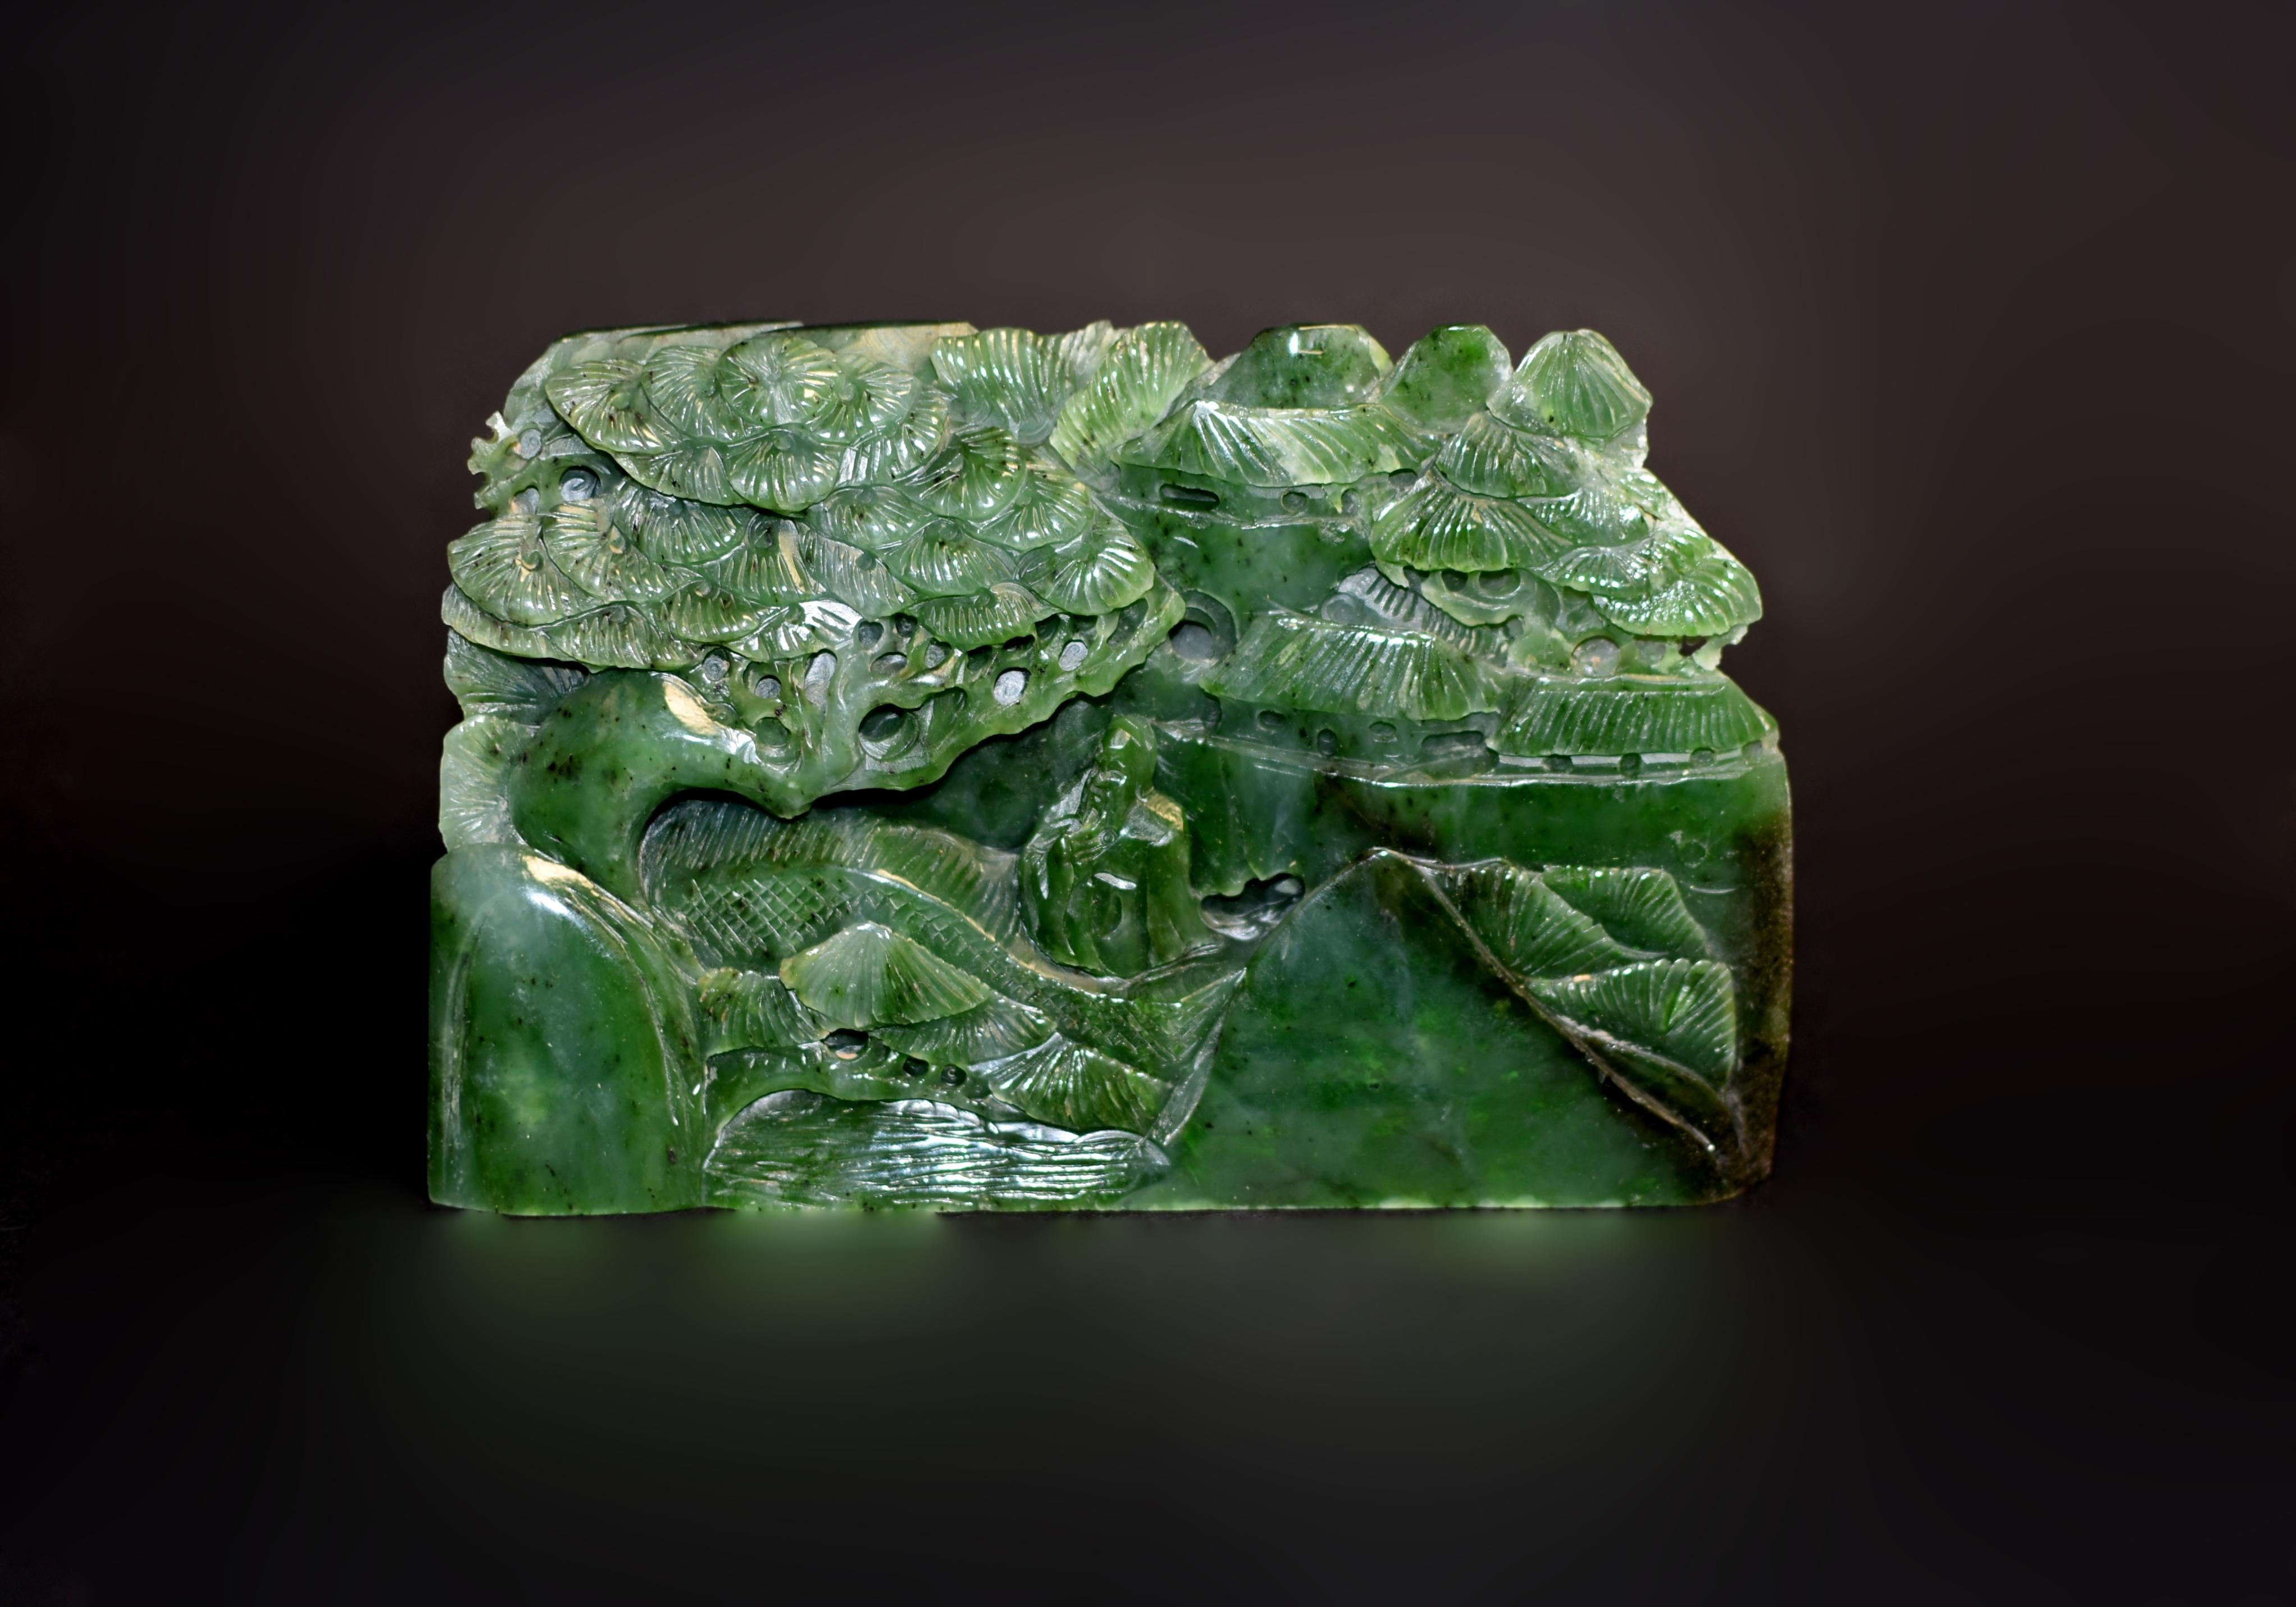 A fine sculpture of solid nephrite jade depicting a peaceful lifestyle. The three dimensional piece features rolling hills and a prominent Chinese pine tree in the foreground, an elderly scholar crossing a bridge with smooth running water underneath